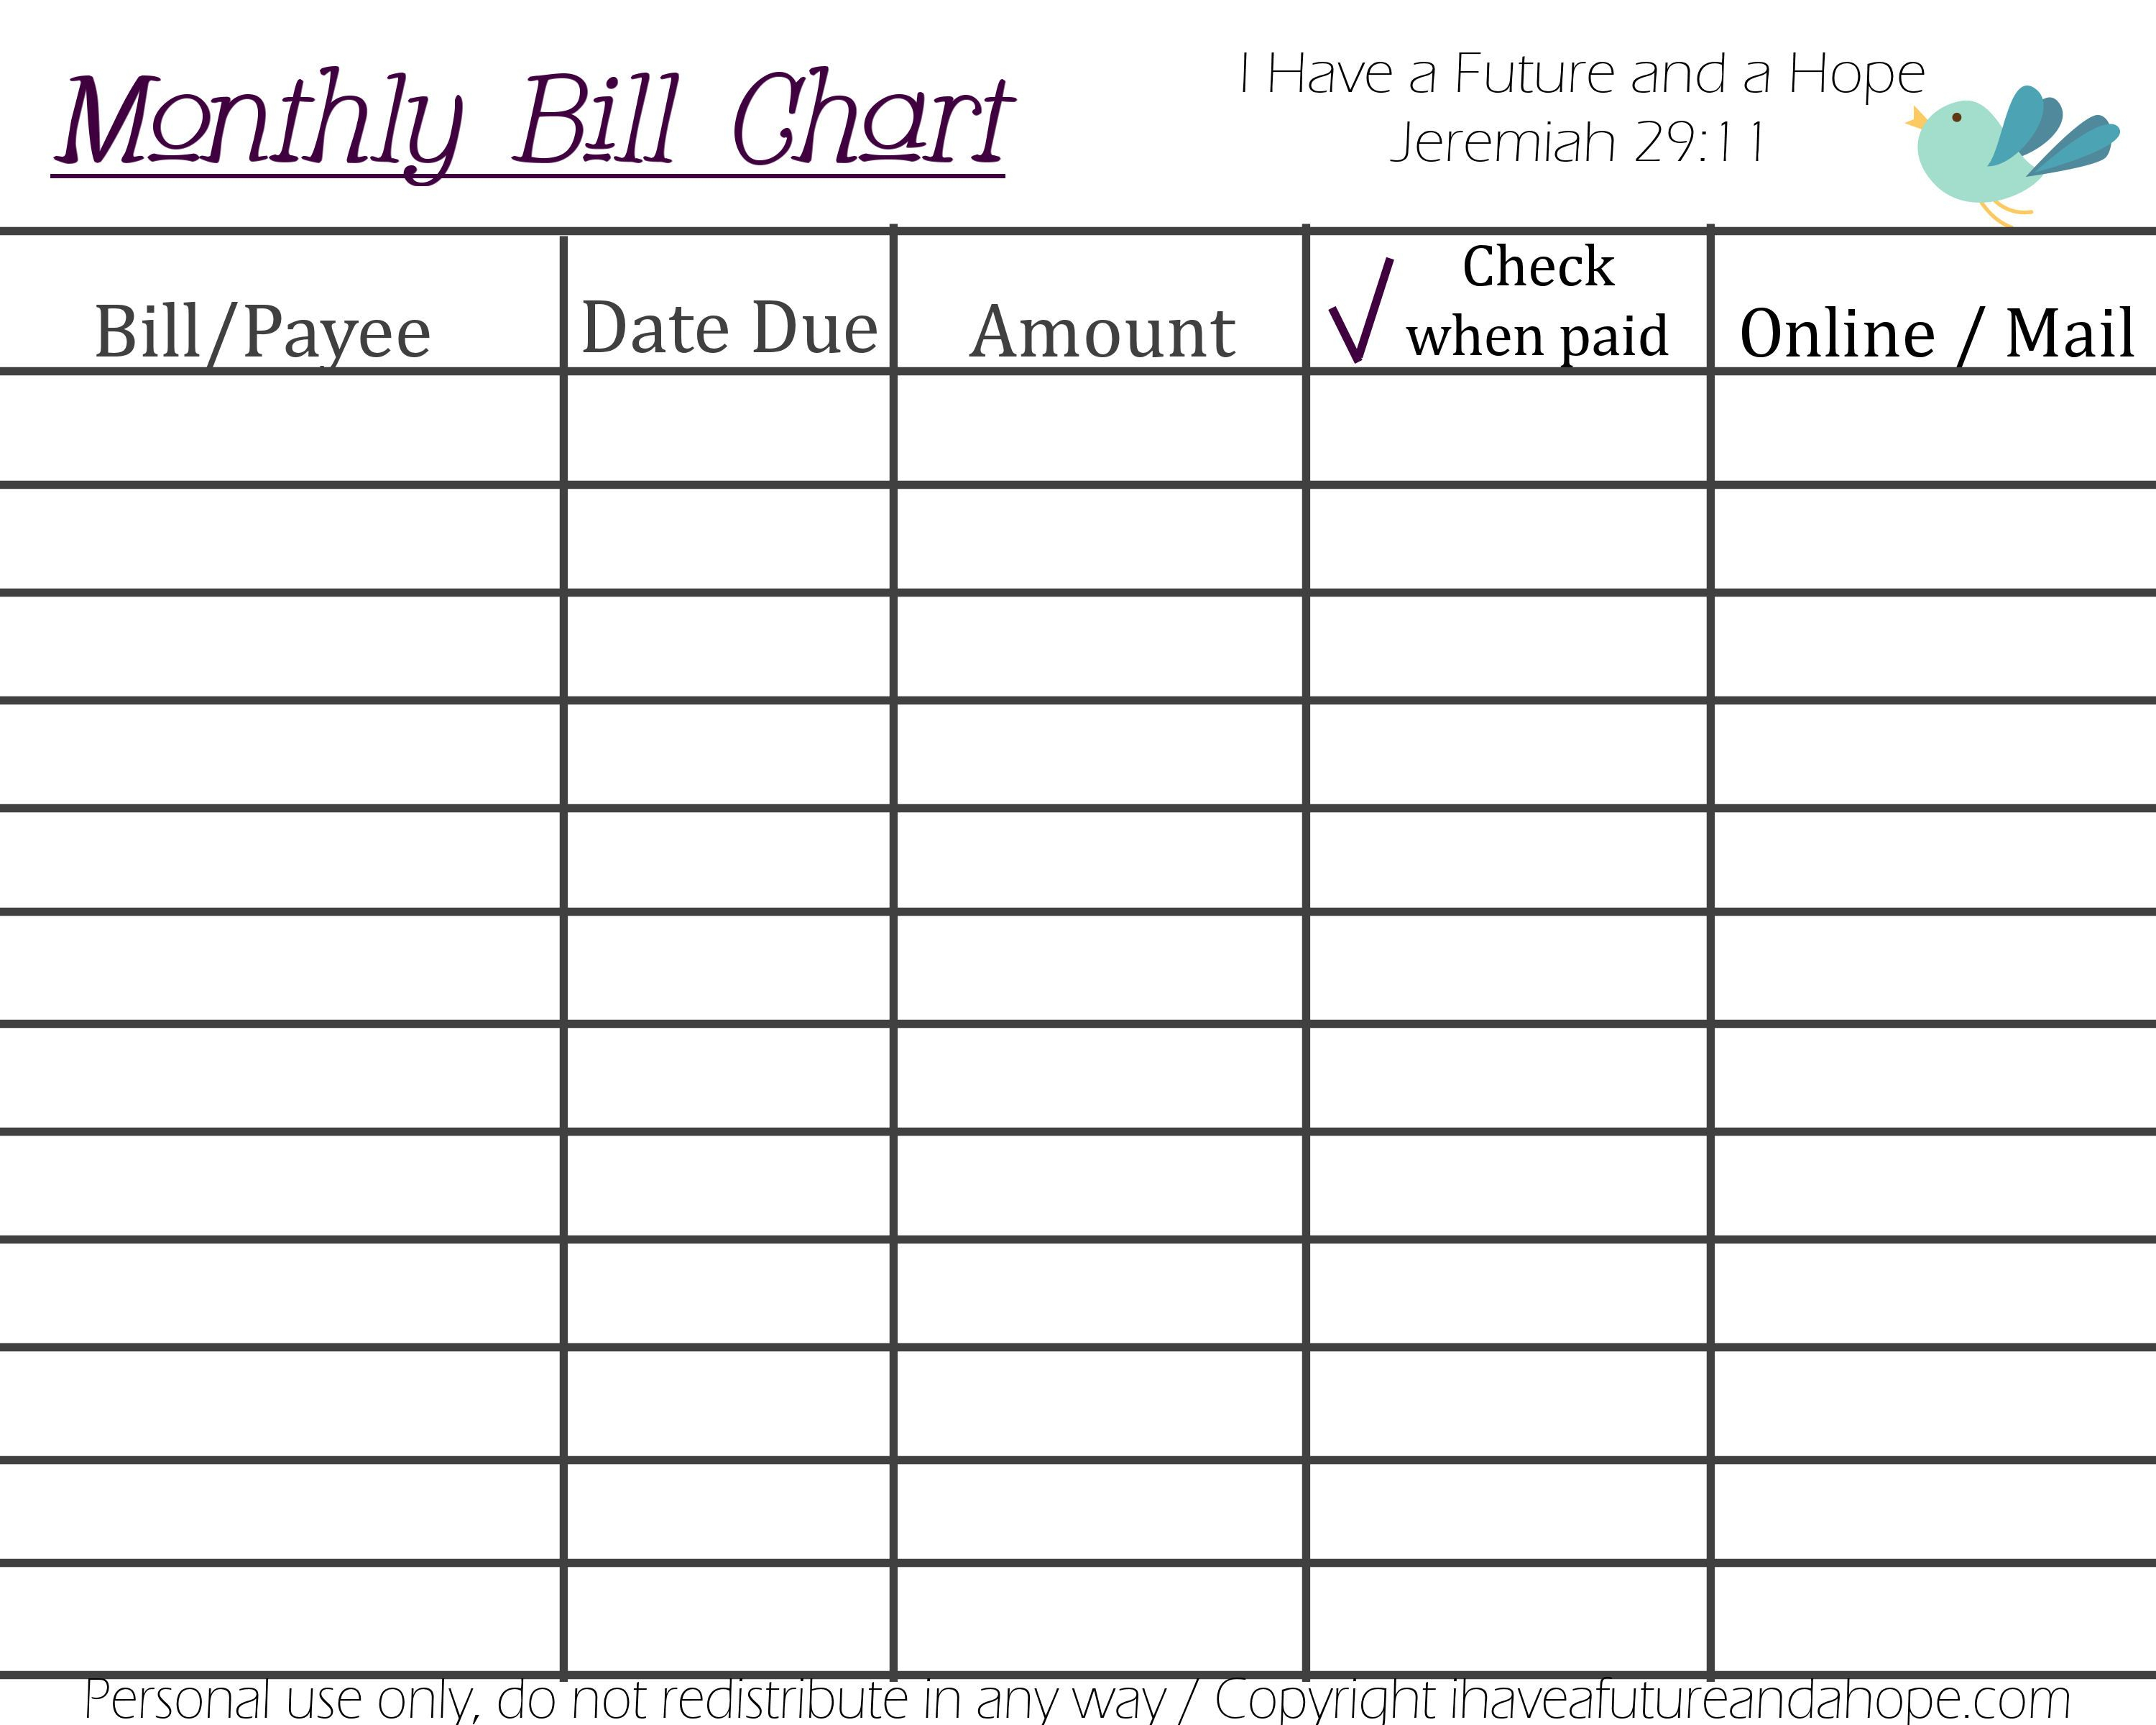 Printable Monthly Bill Chart | Paying Bills, Budget regarding Monthly Bill Payment Worksheet